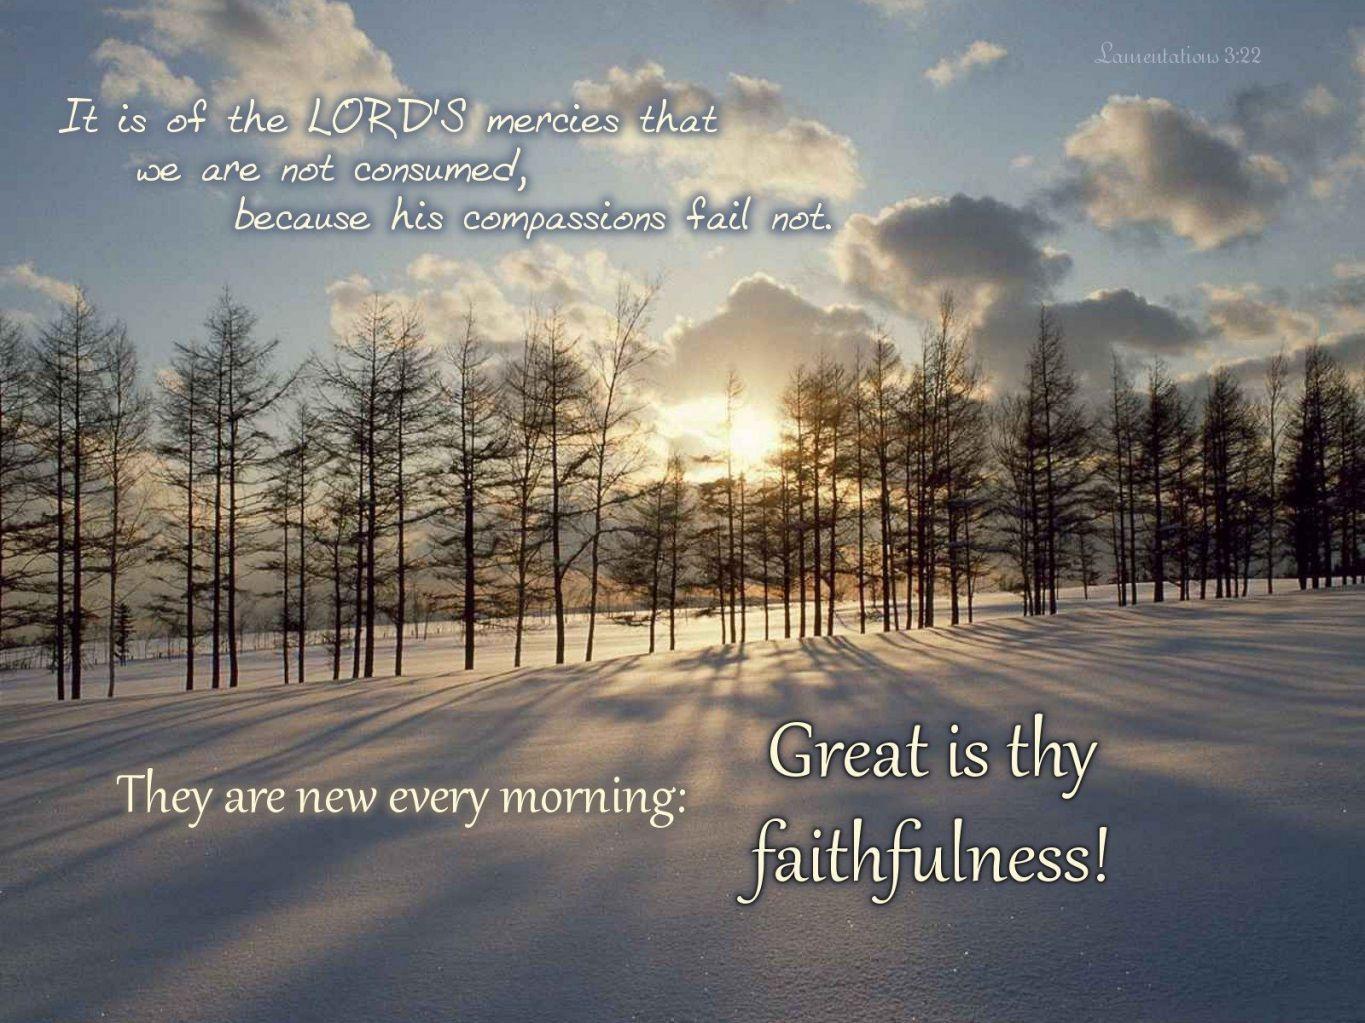 Christian Quotes Image. Winter scenery, Winter